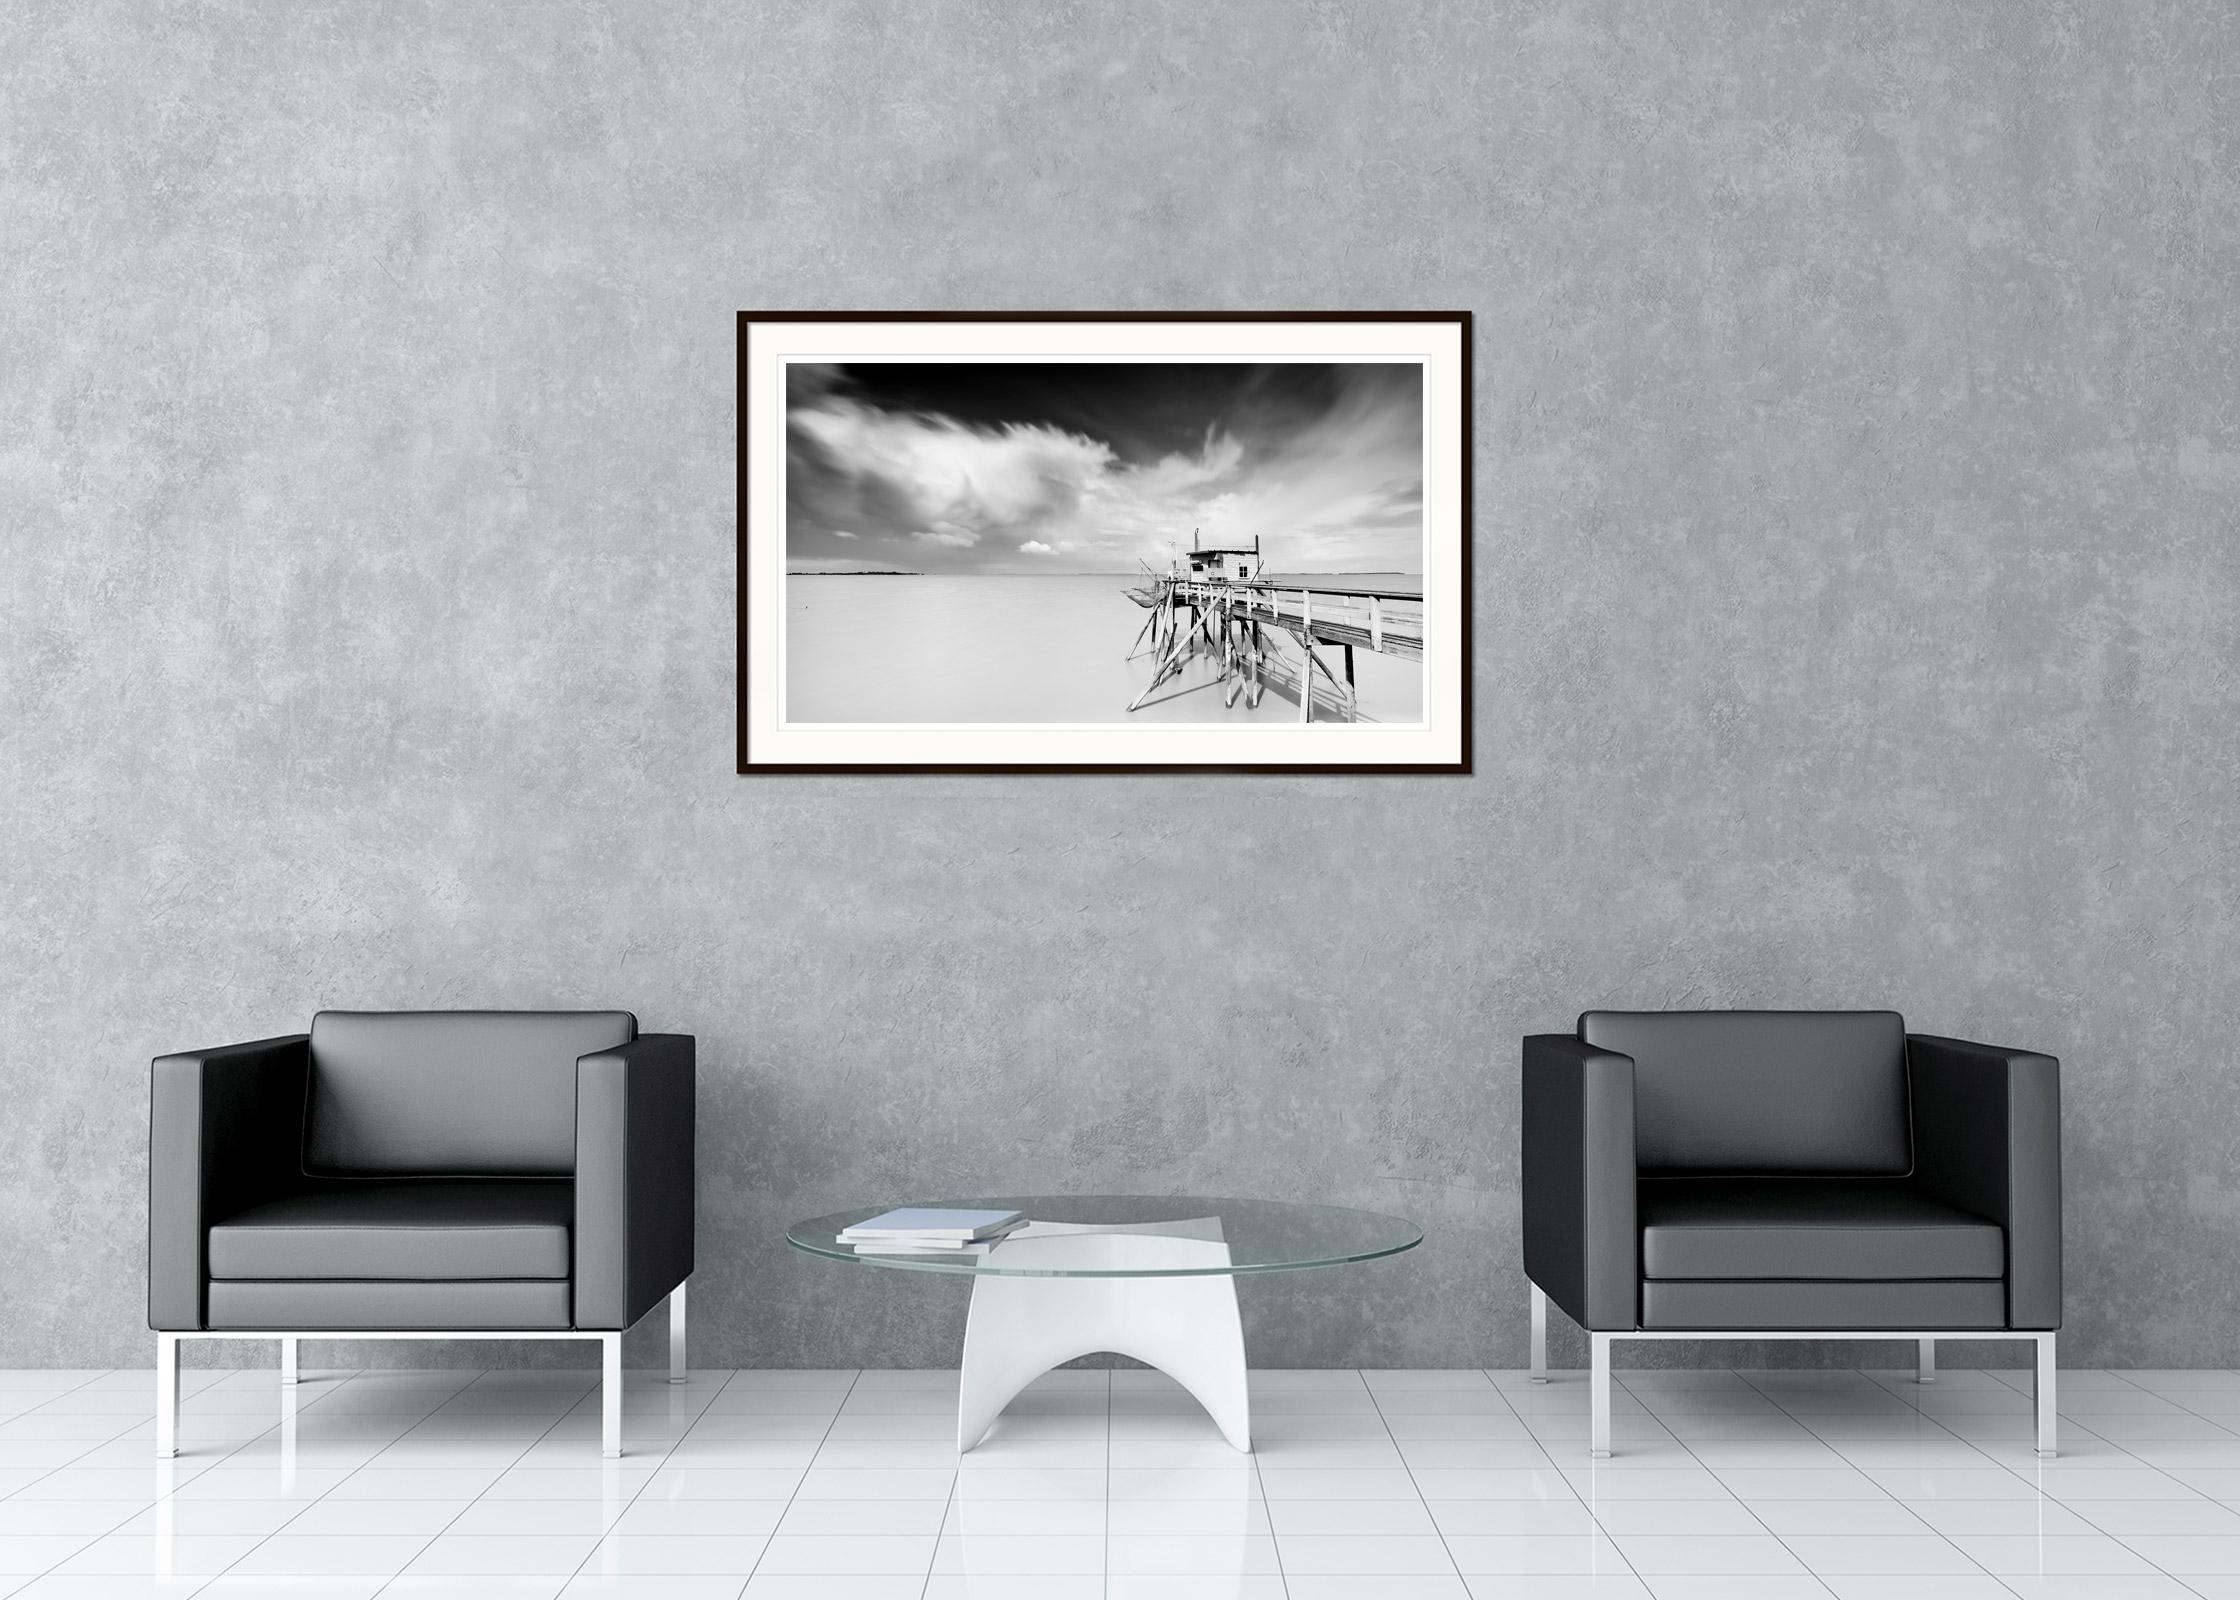 Black and white fine art panorama long exposure landscape photography. Archival pigment ink print, edition of 7. Signed, titled, dated and numbered by artist. Certificate of authenticity included. Printed with 4cm white border.
International award